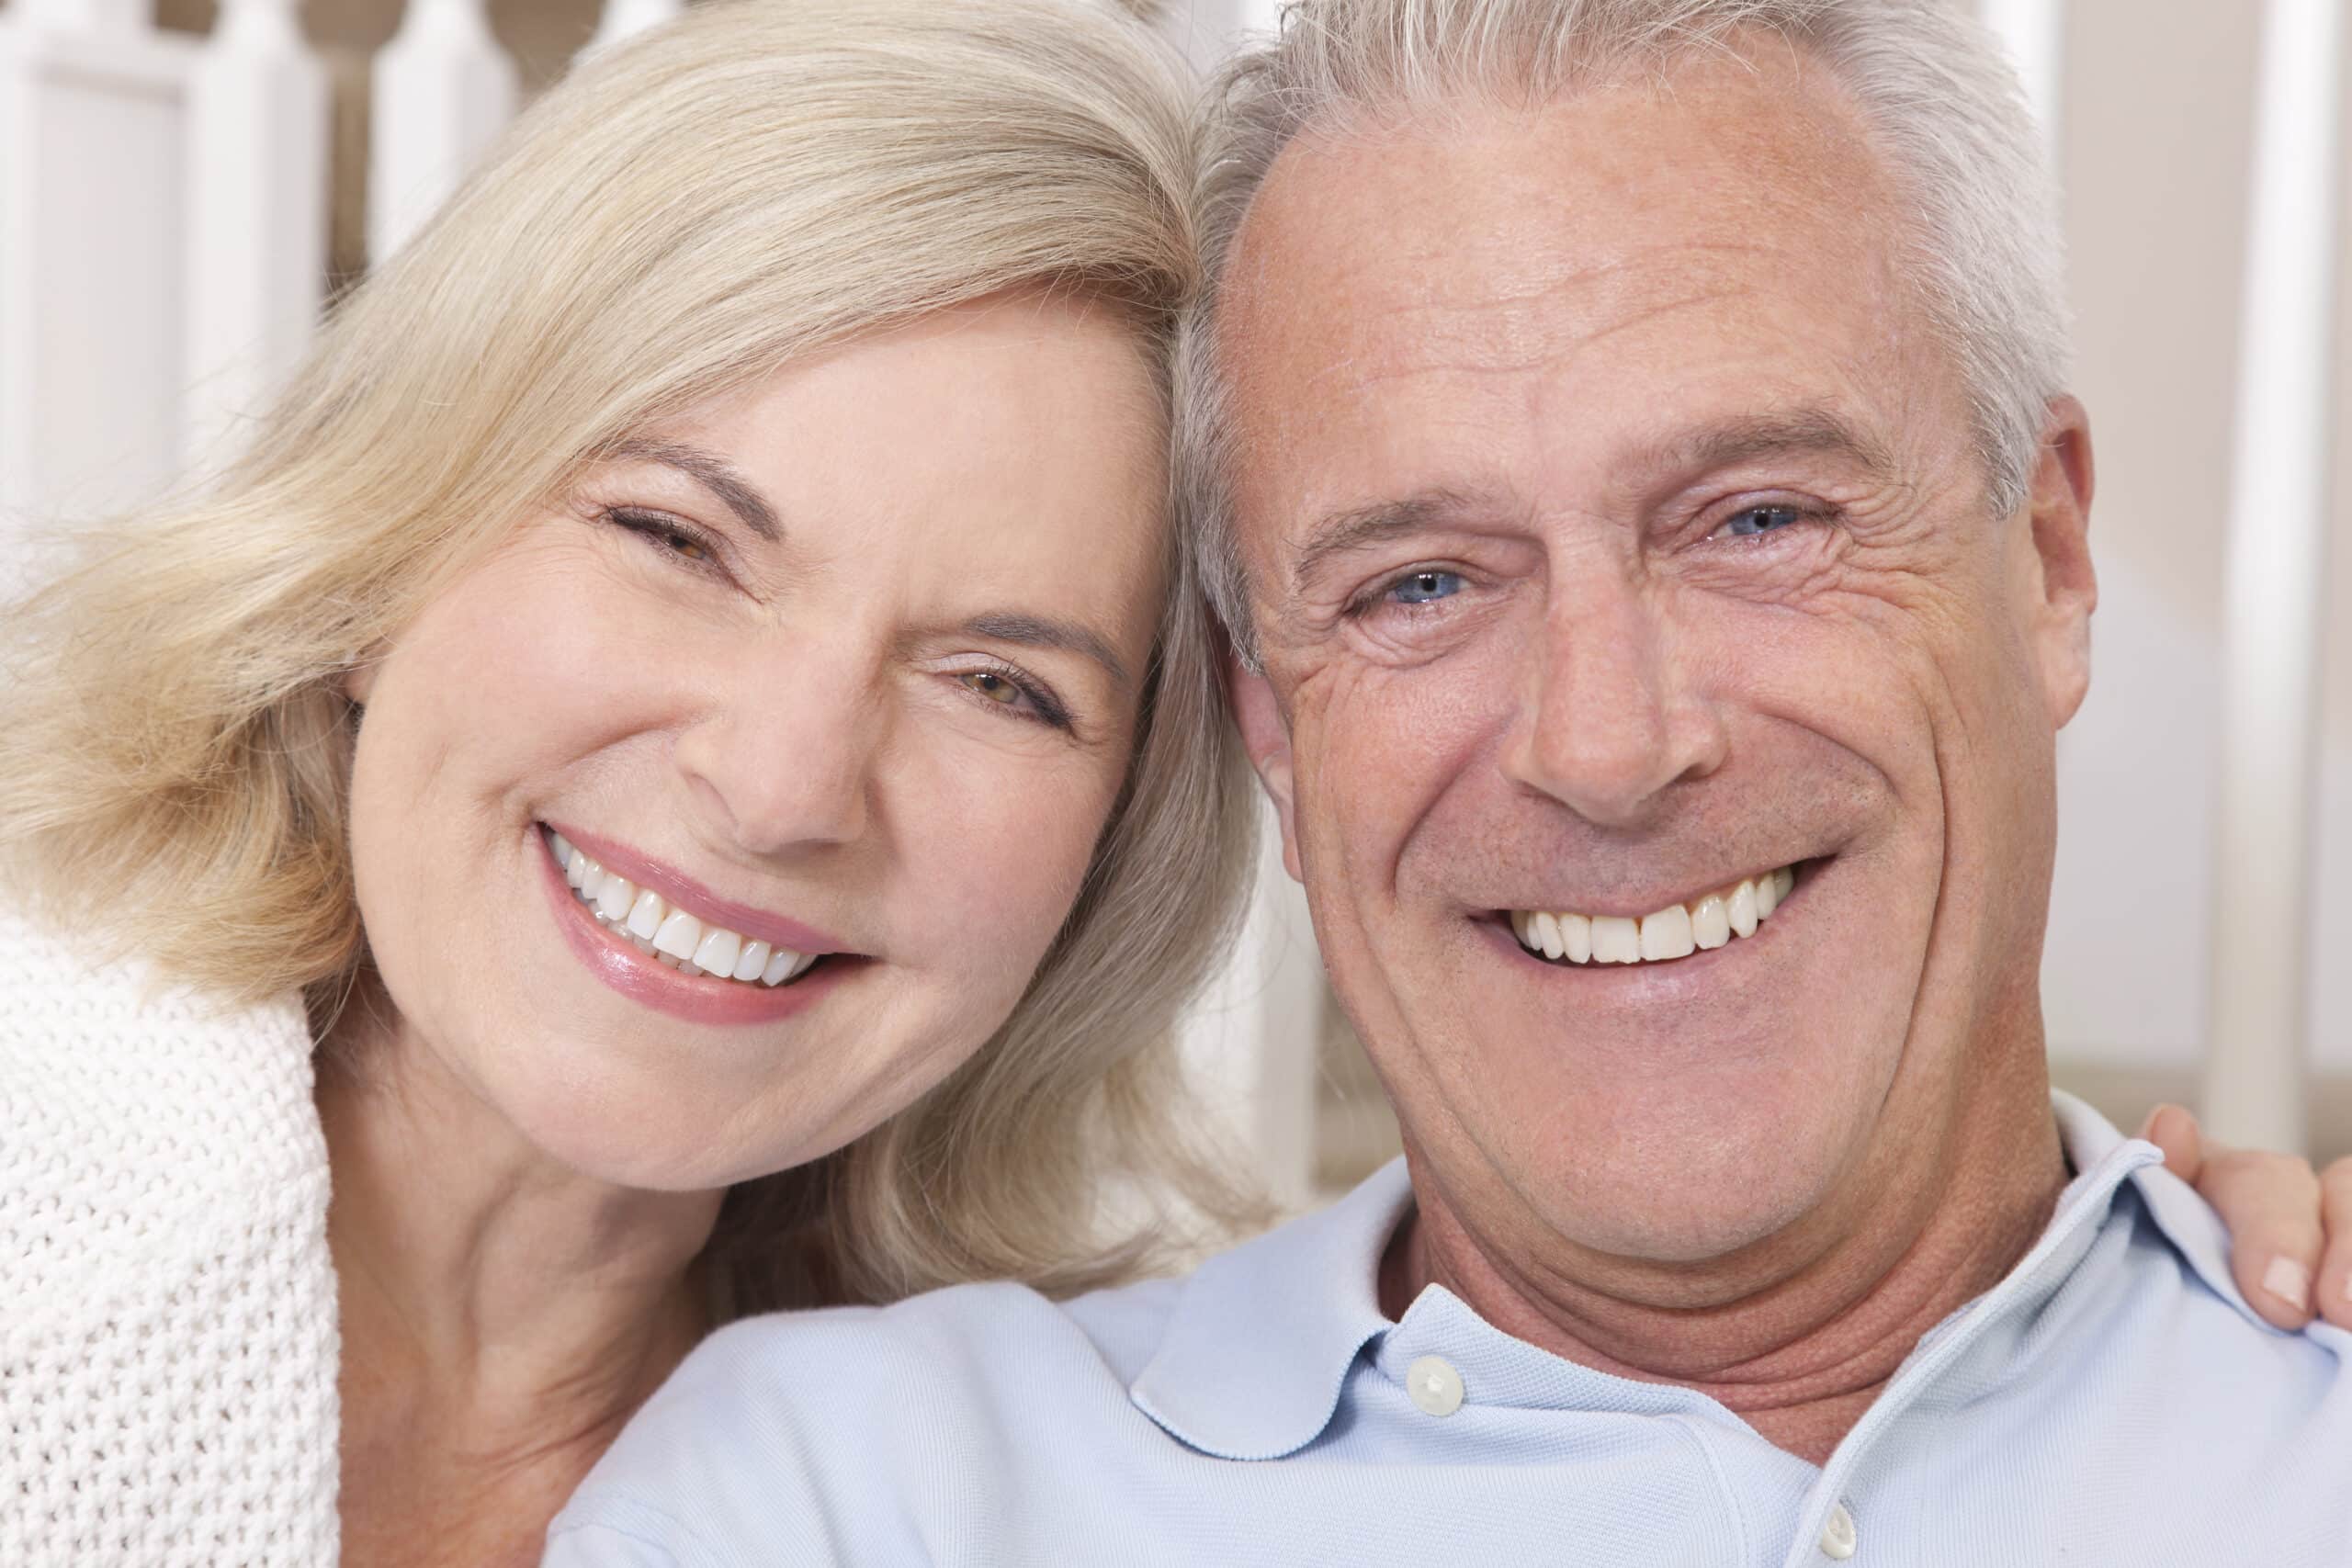 Who Is A Good Candidate For Immediate Dentures?